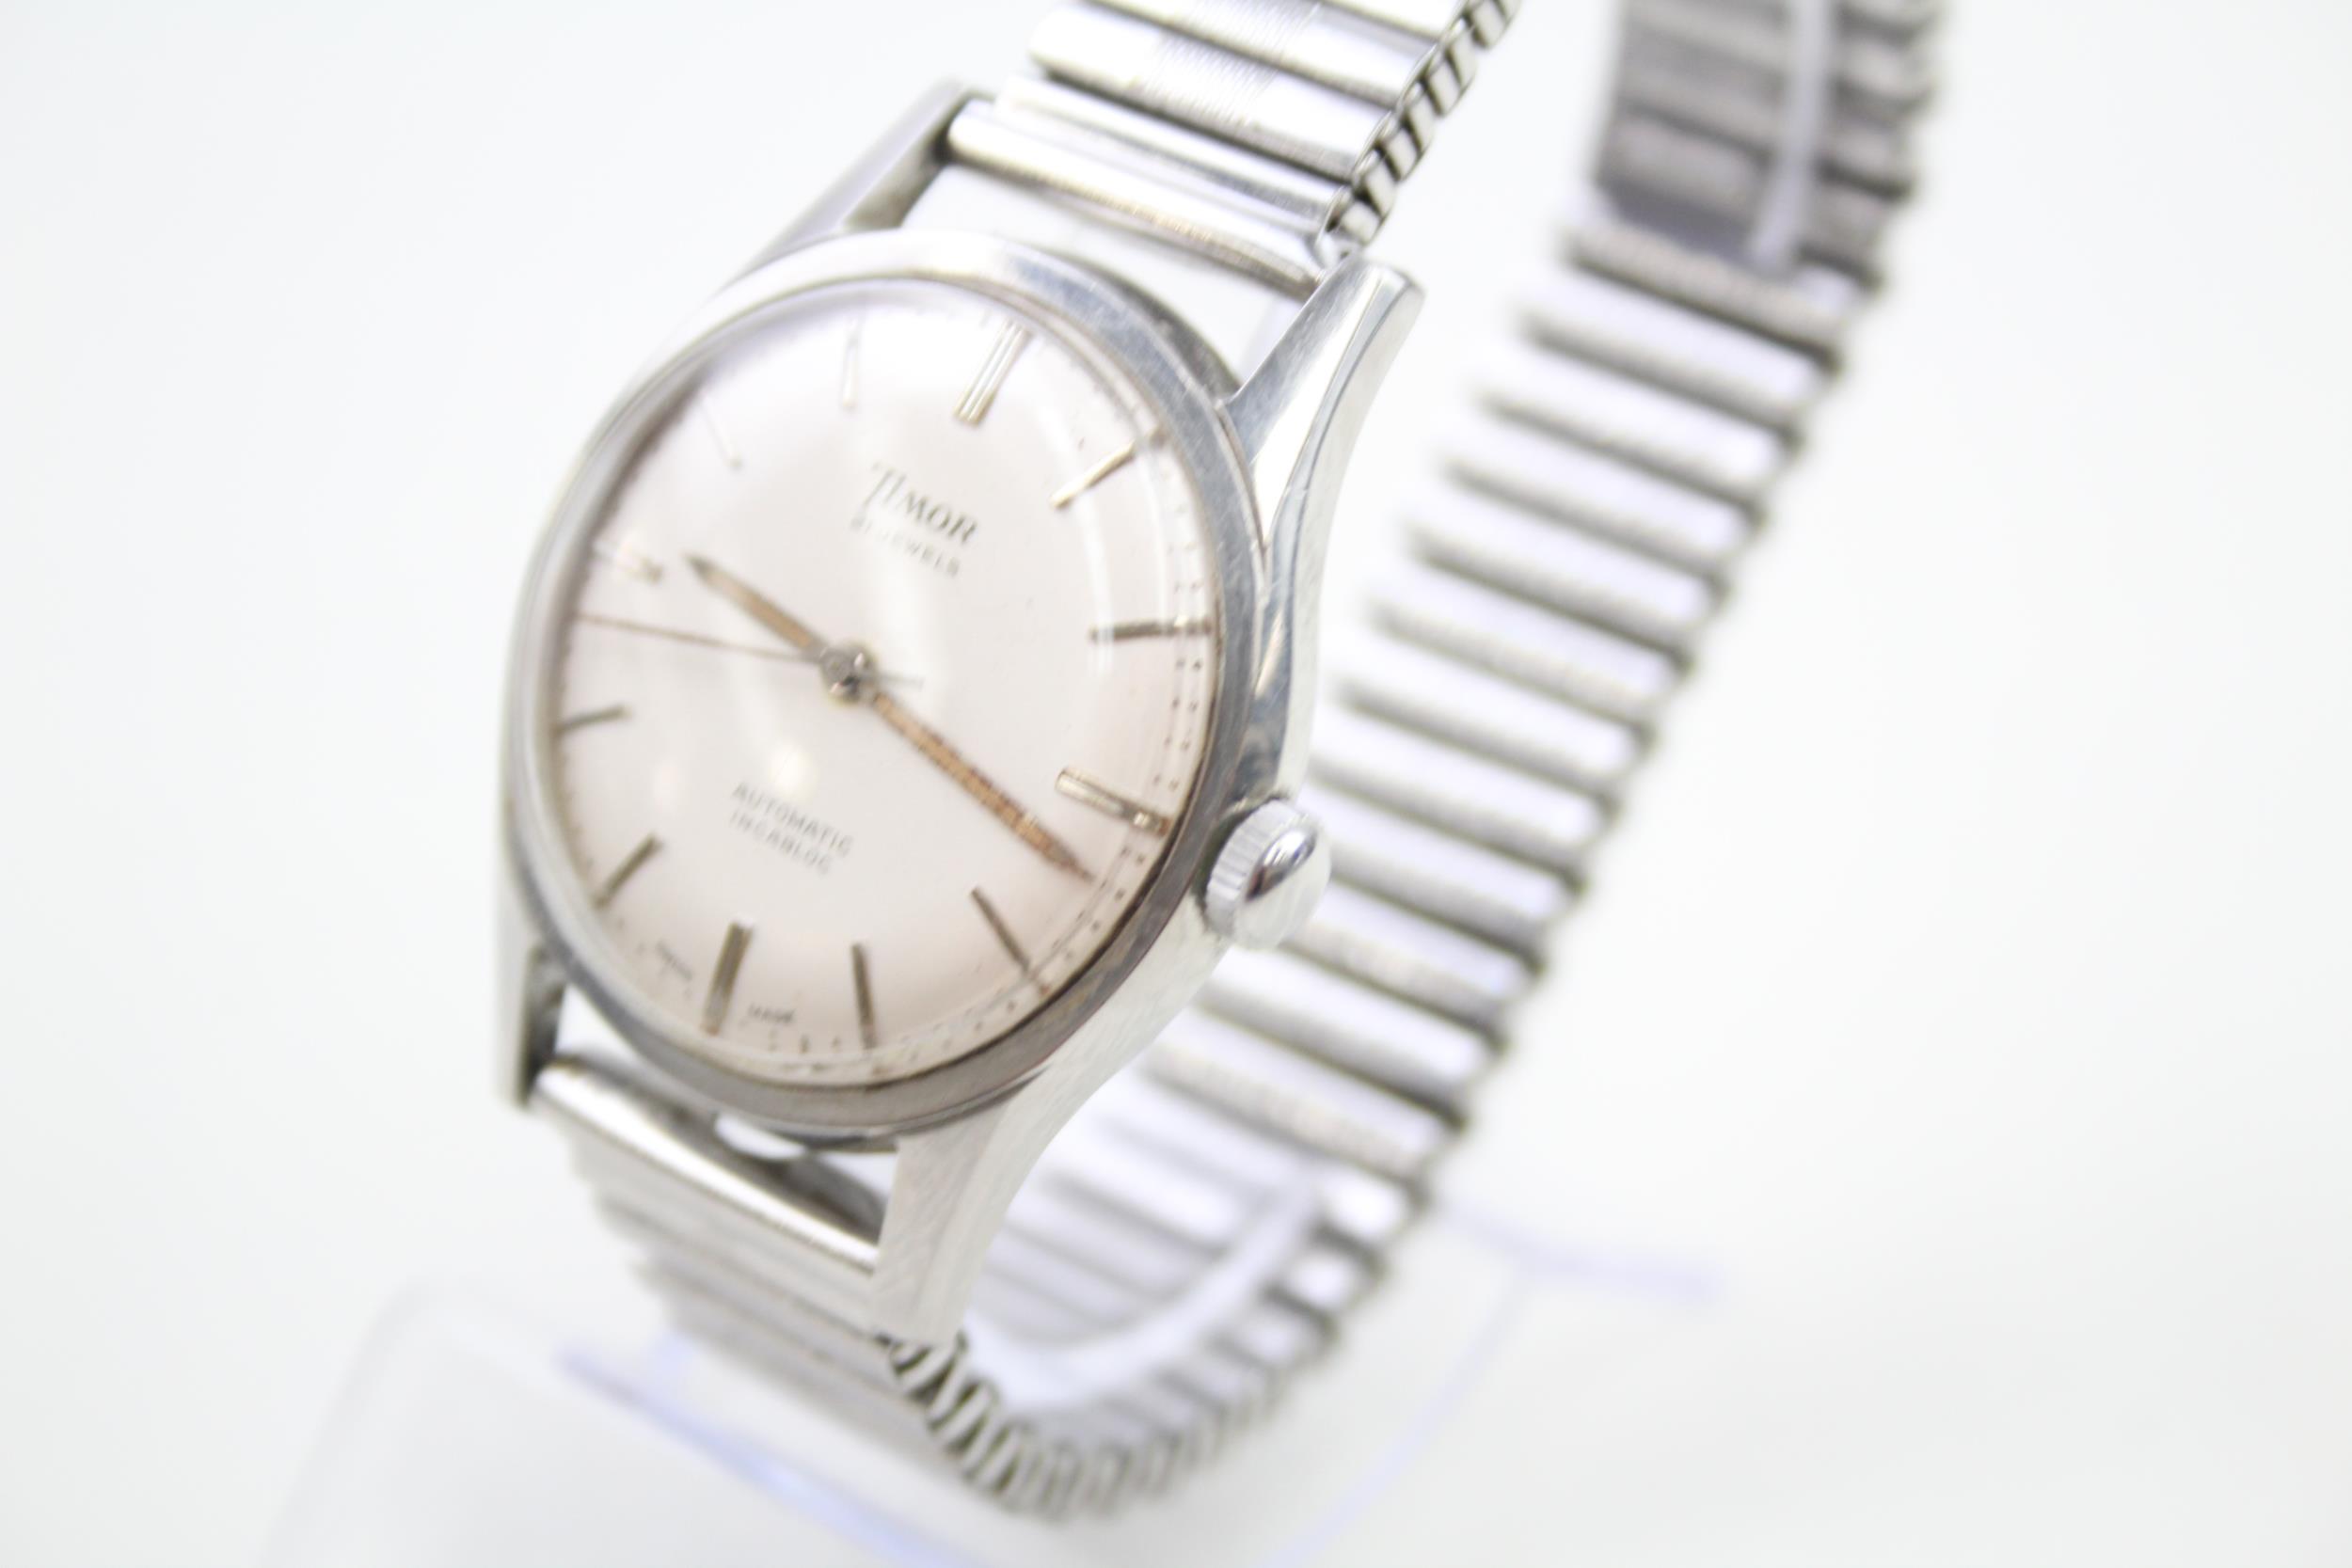 Timor Vintage Stainless Steel WRISTWATCH Automatic WORKING - Timor Vintage Stainless Steel - Image 3 of 6